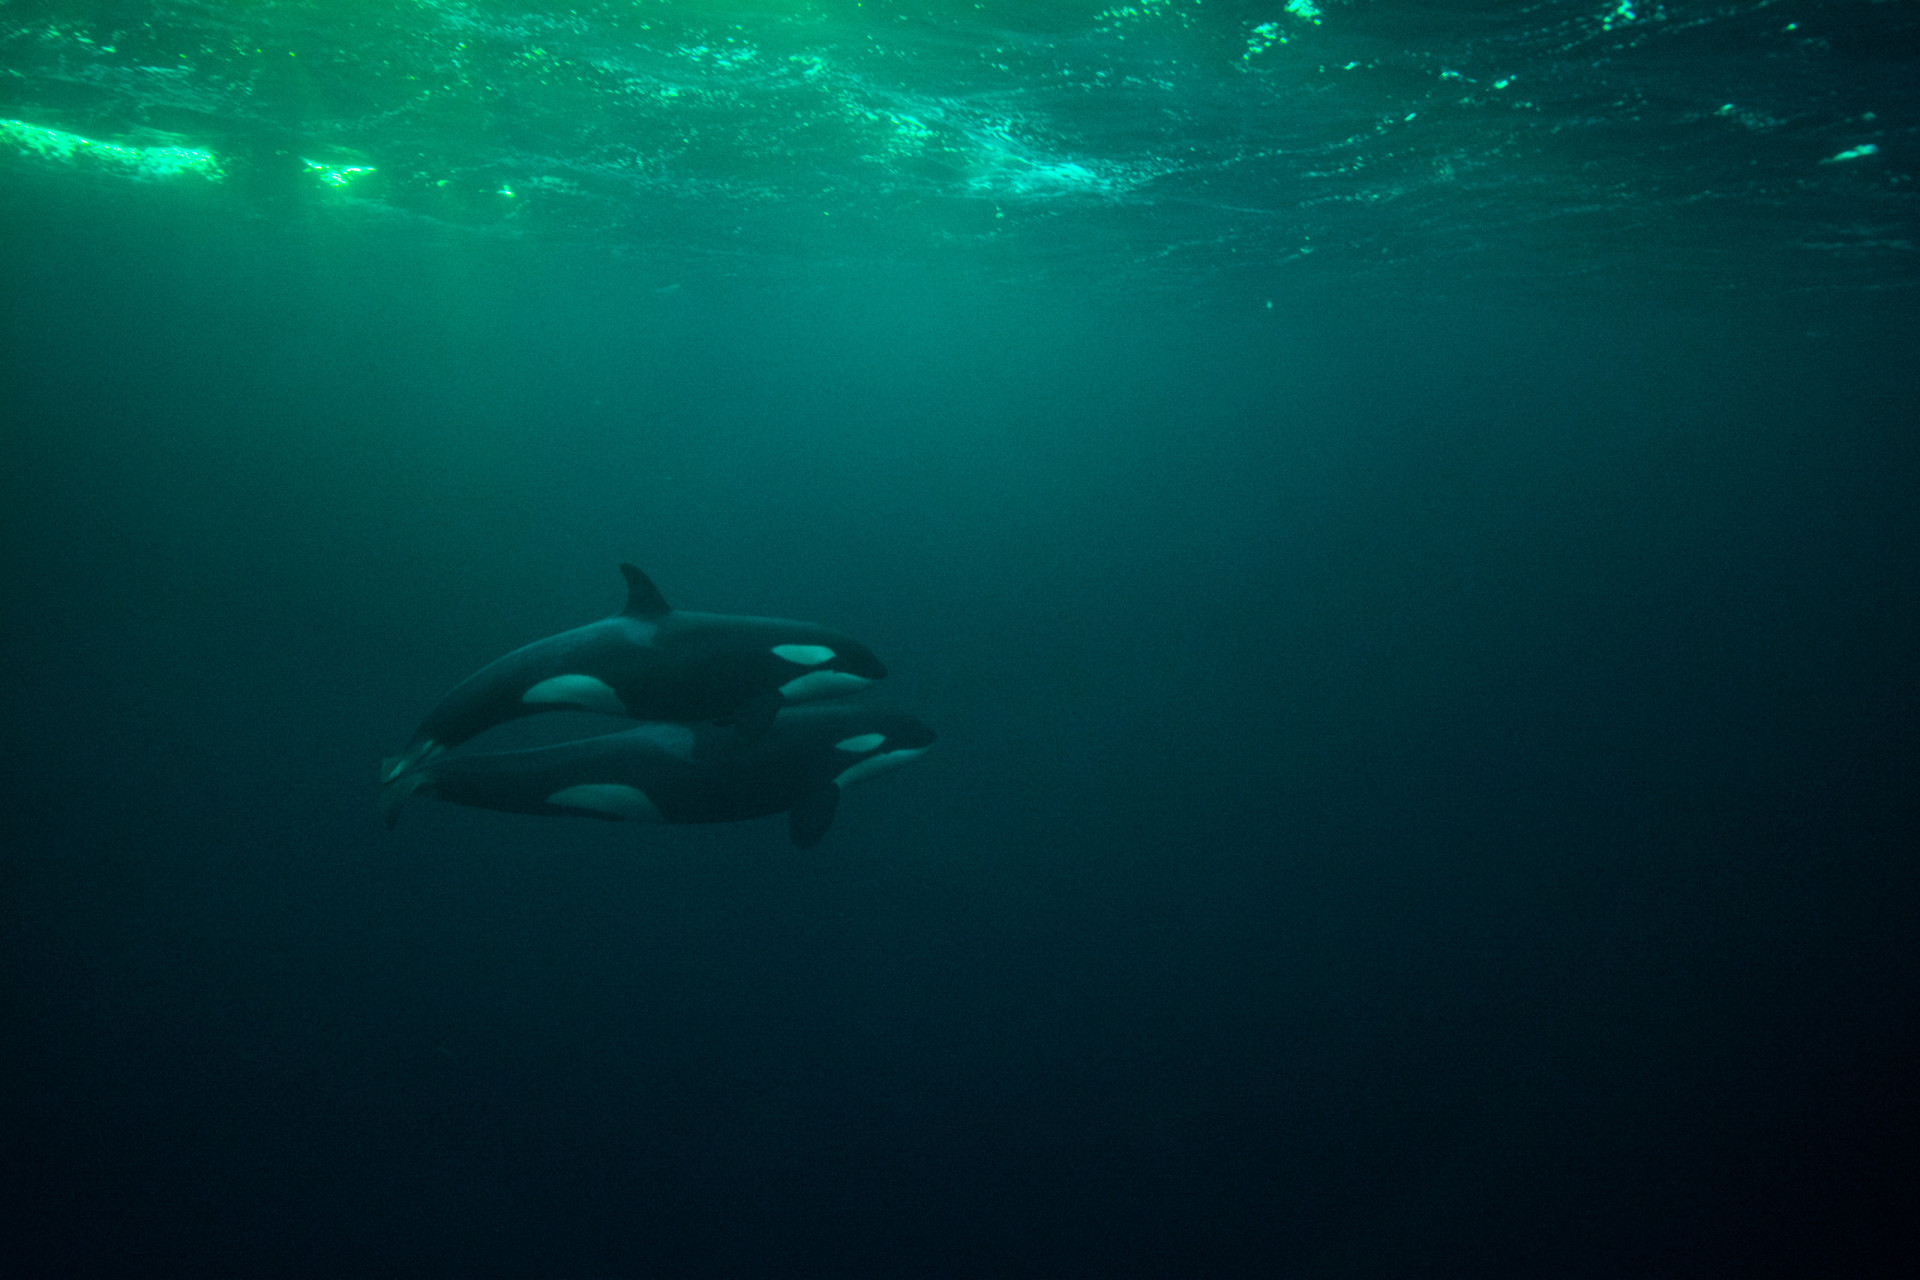 <p>Scientists concluded that the orcas must have learned that consuming shark livers provides high energy and nutrients—because of their large quantities of fats and vitamins—and remembered exactly where to attack to get the liver without having to tear through the shark and damage their teeth.</p><p>You may also like:<a href="https://www.starsinsider.com/n/407091?utm_source=msn.com&utm_medium=display&utm_campaign=referral_description&utm_content=551403en-en_selected"> Julia Roberts: A friend or foe in Hollywood?</a></p>